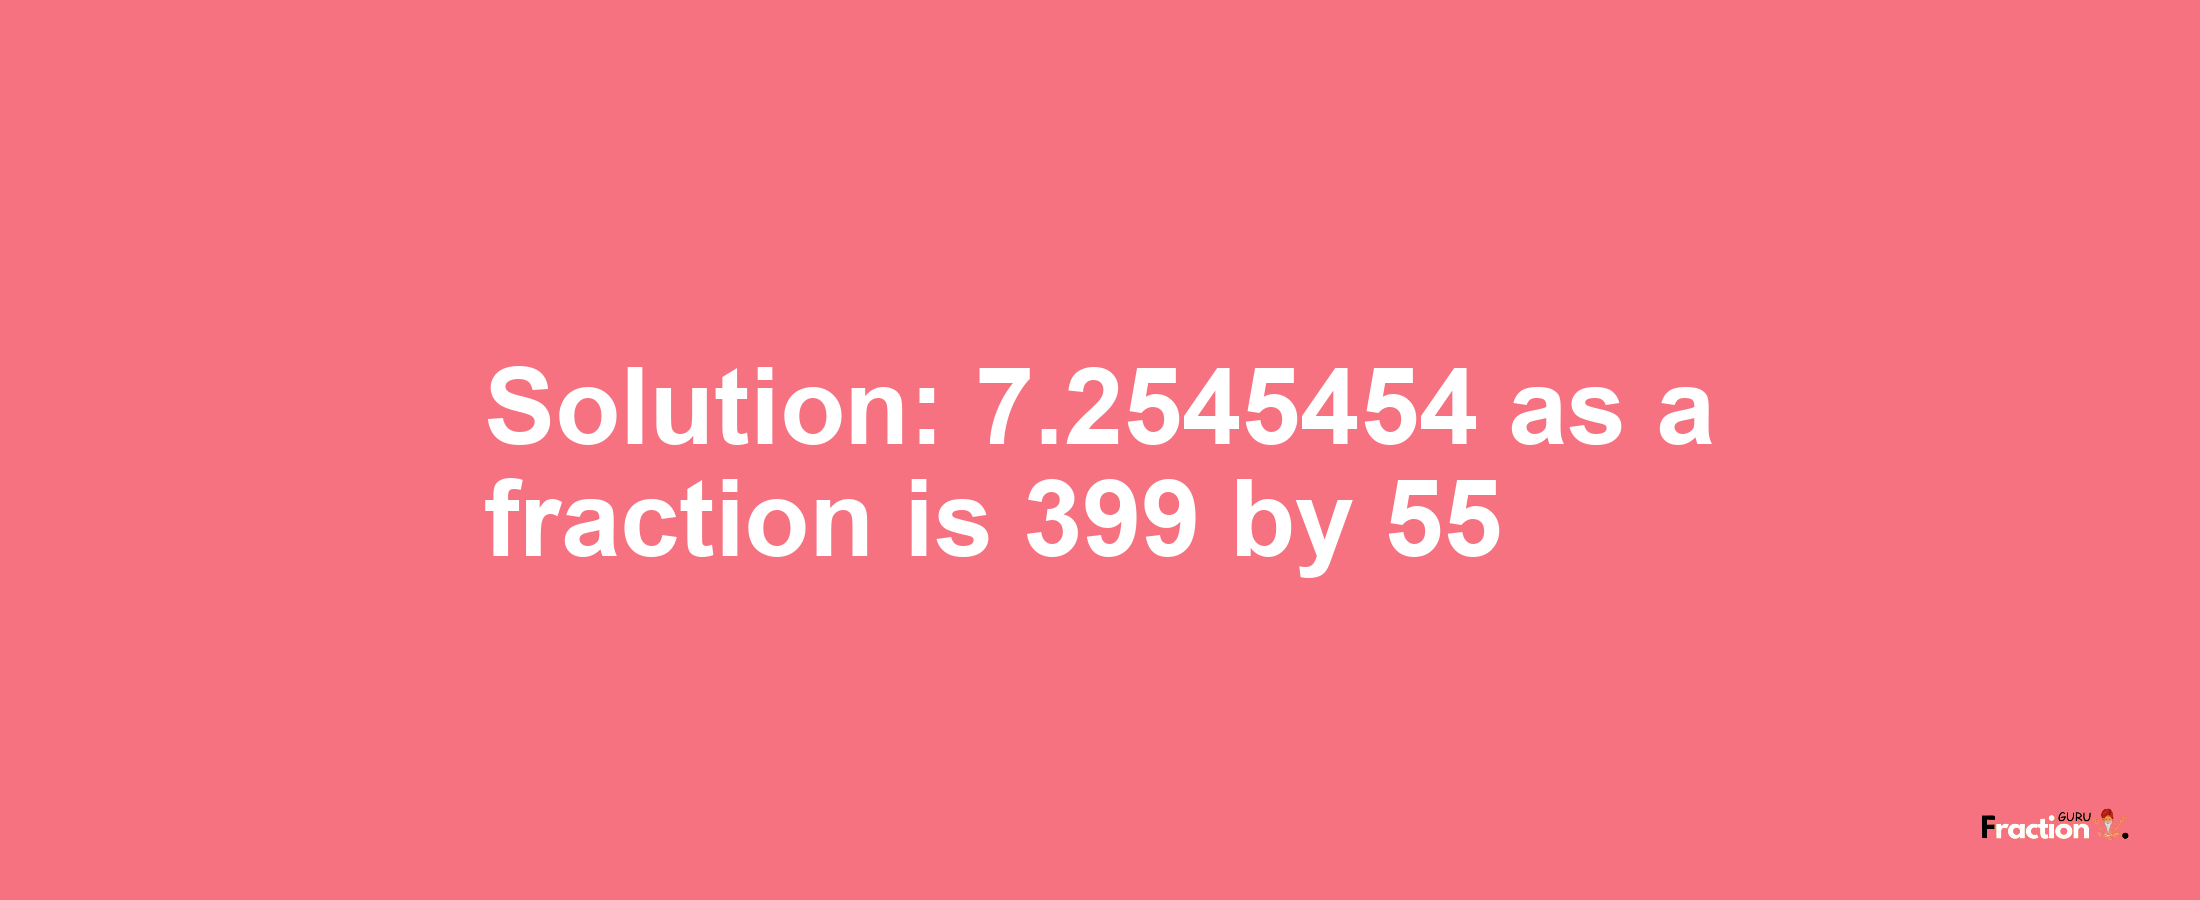 Solution:7.2545454 as a fraction is 399/55